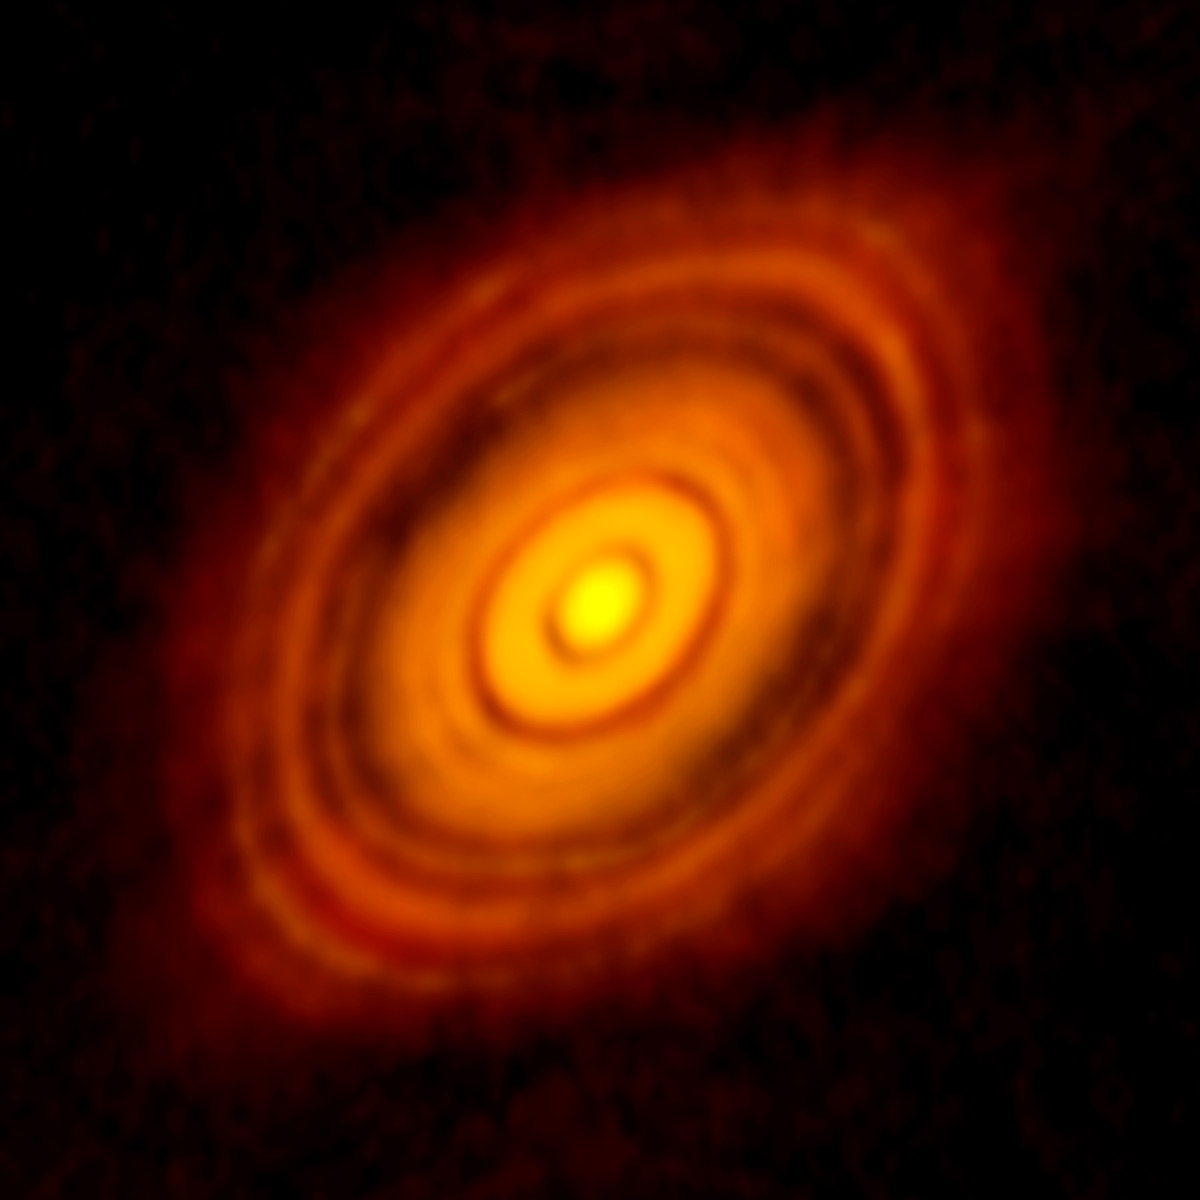 HL Tau: Birth of Planets Revealed in Astonishing Detail